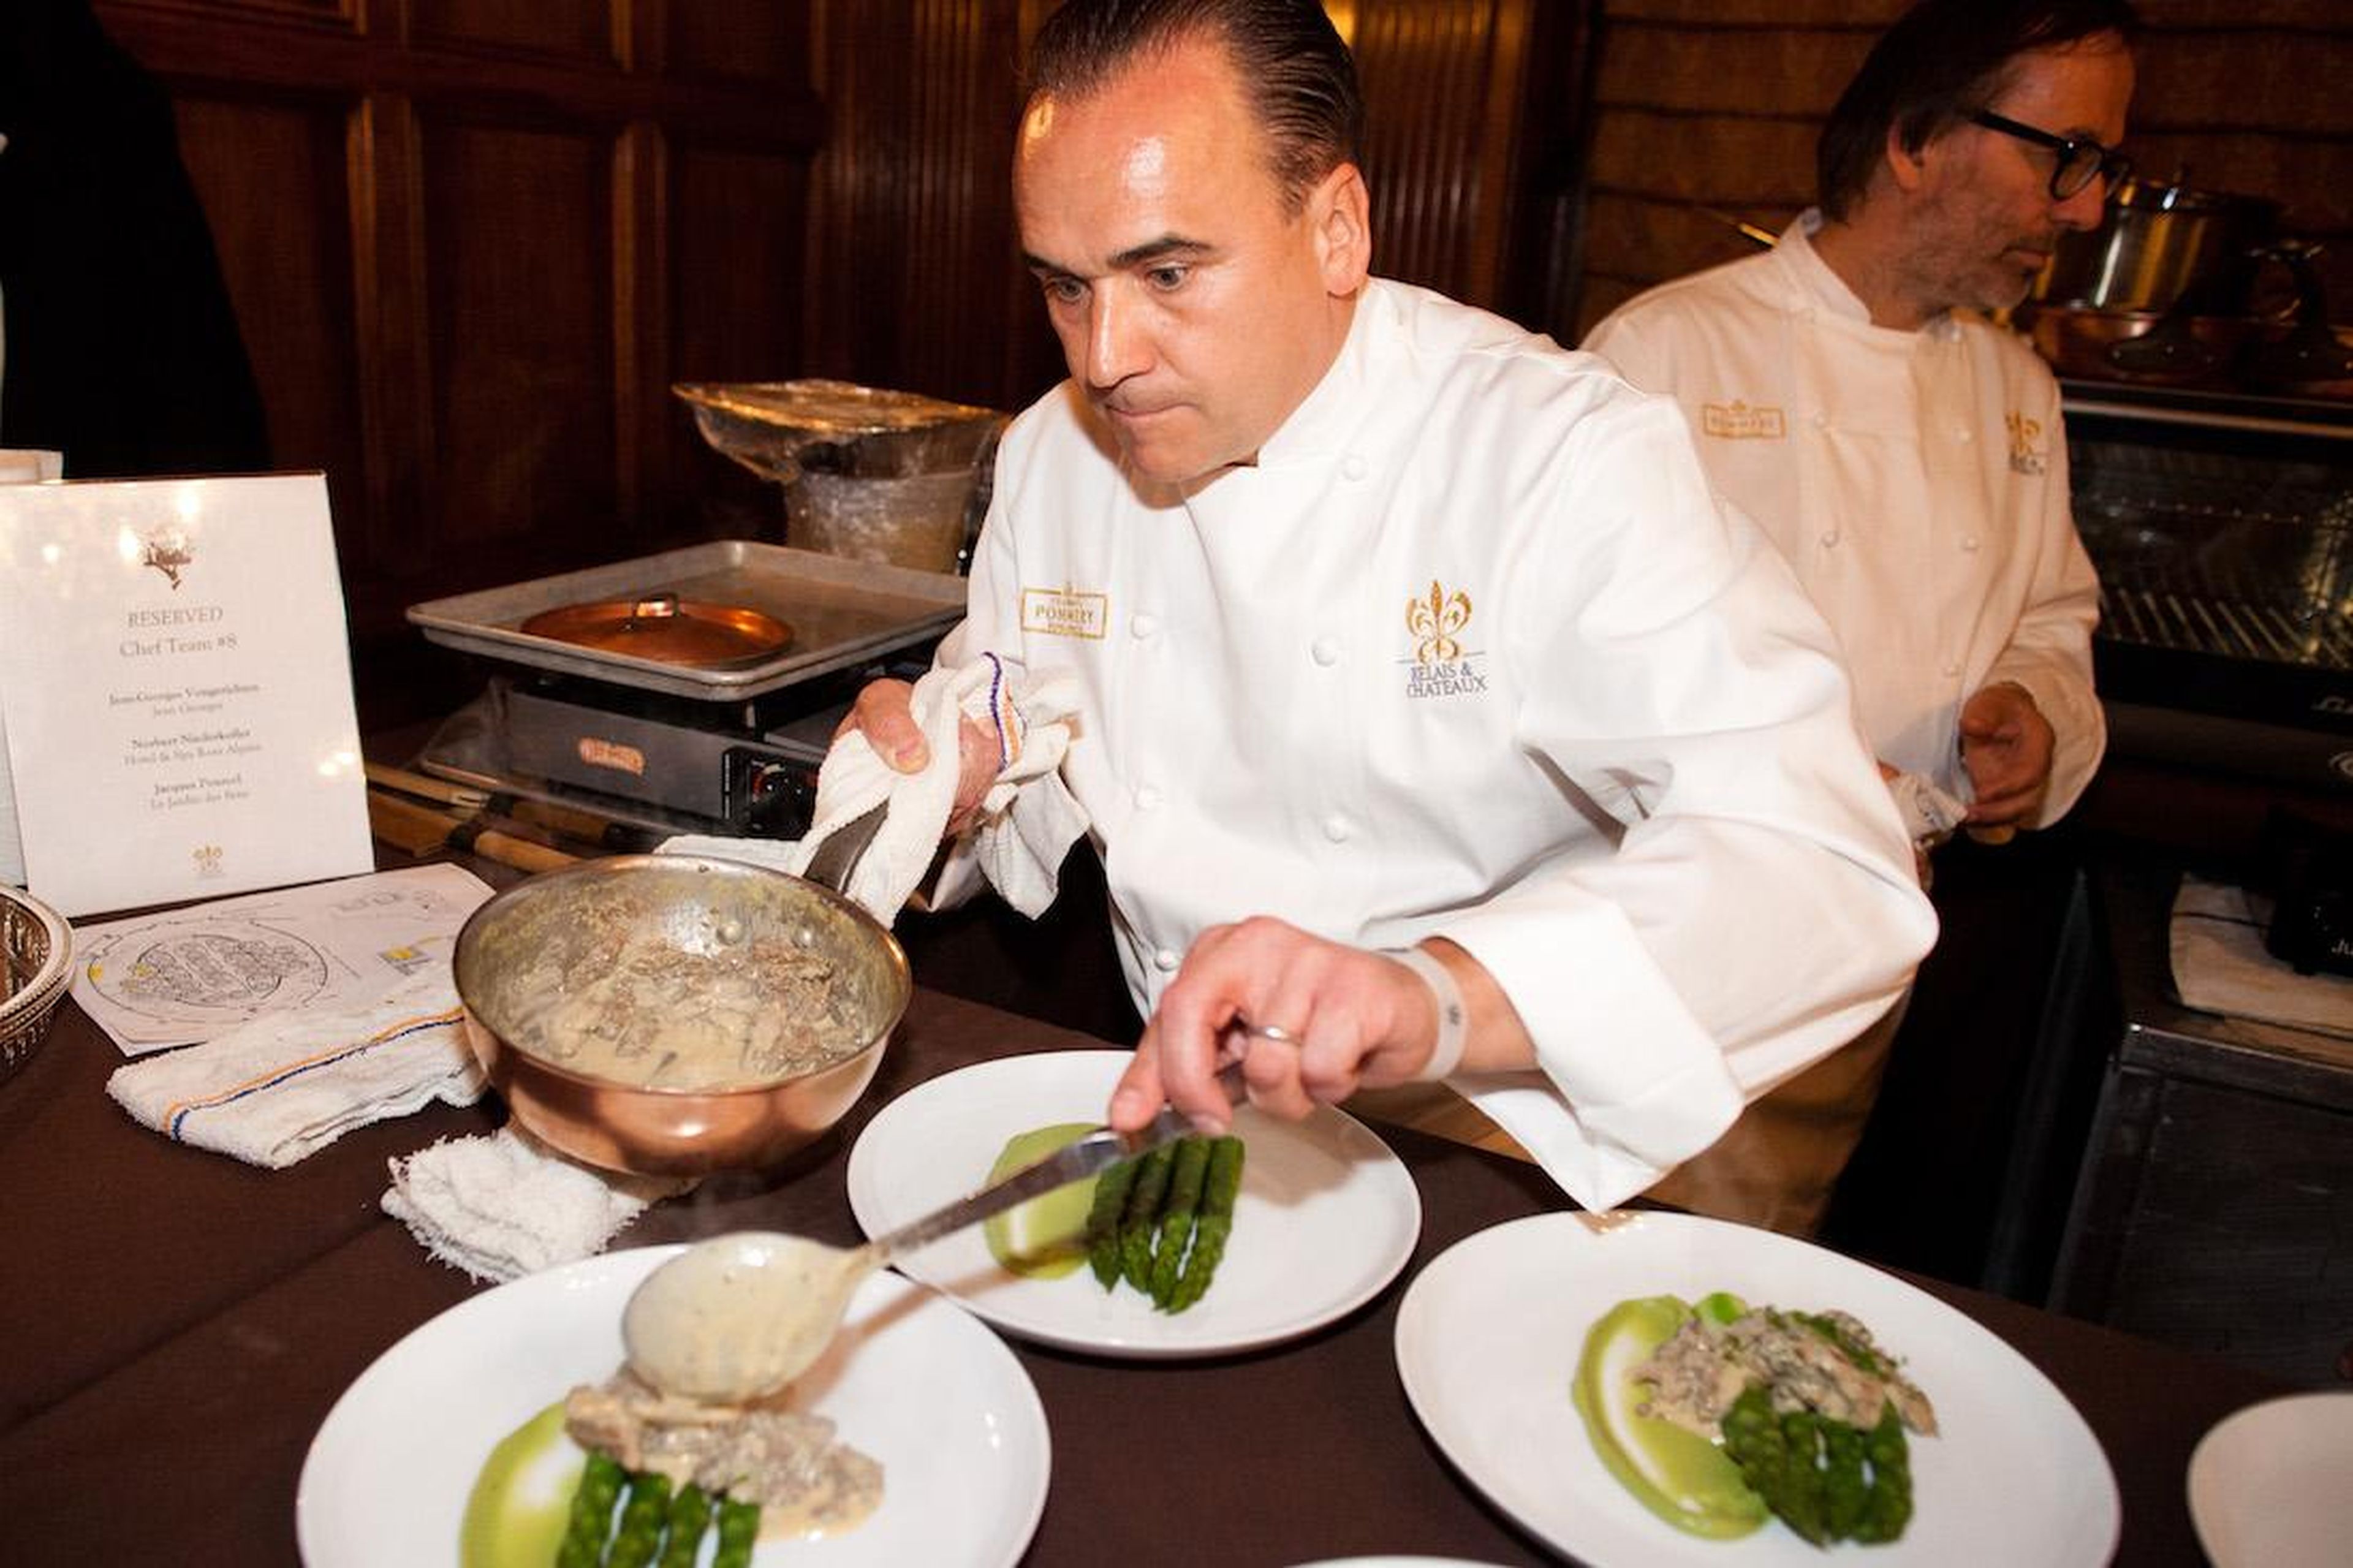 French chef Jean-Georges Vongerichten plates a dish for service during the 2012 Grands Chefs Dinner in New York.